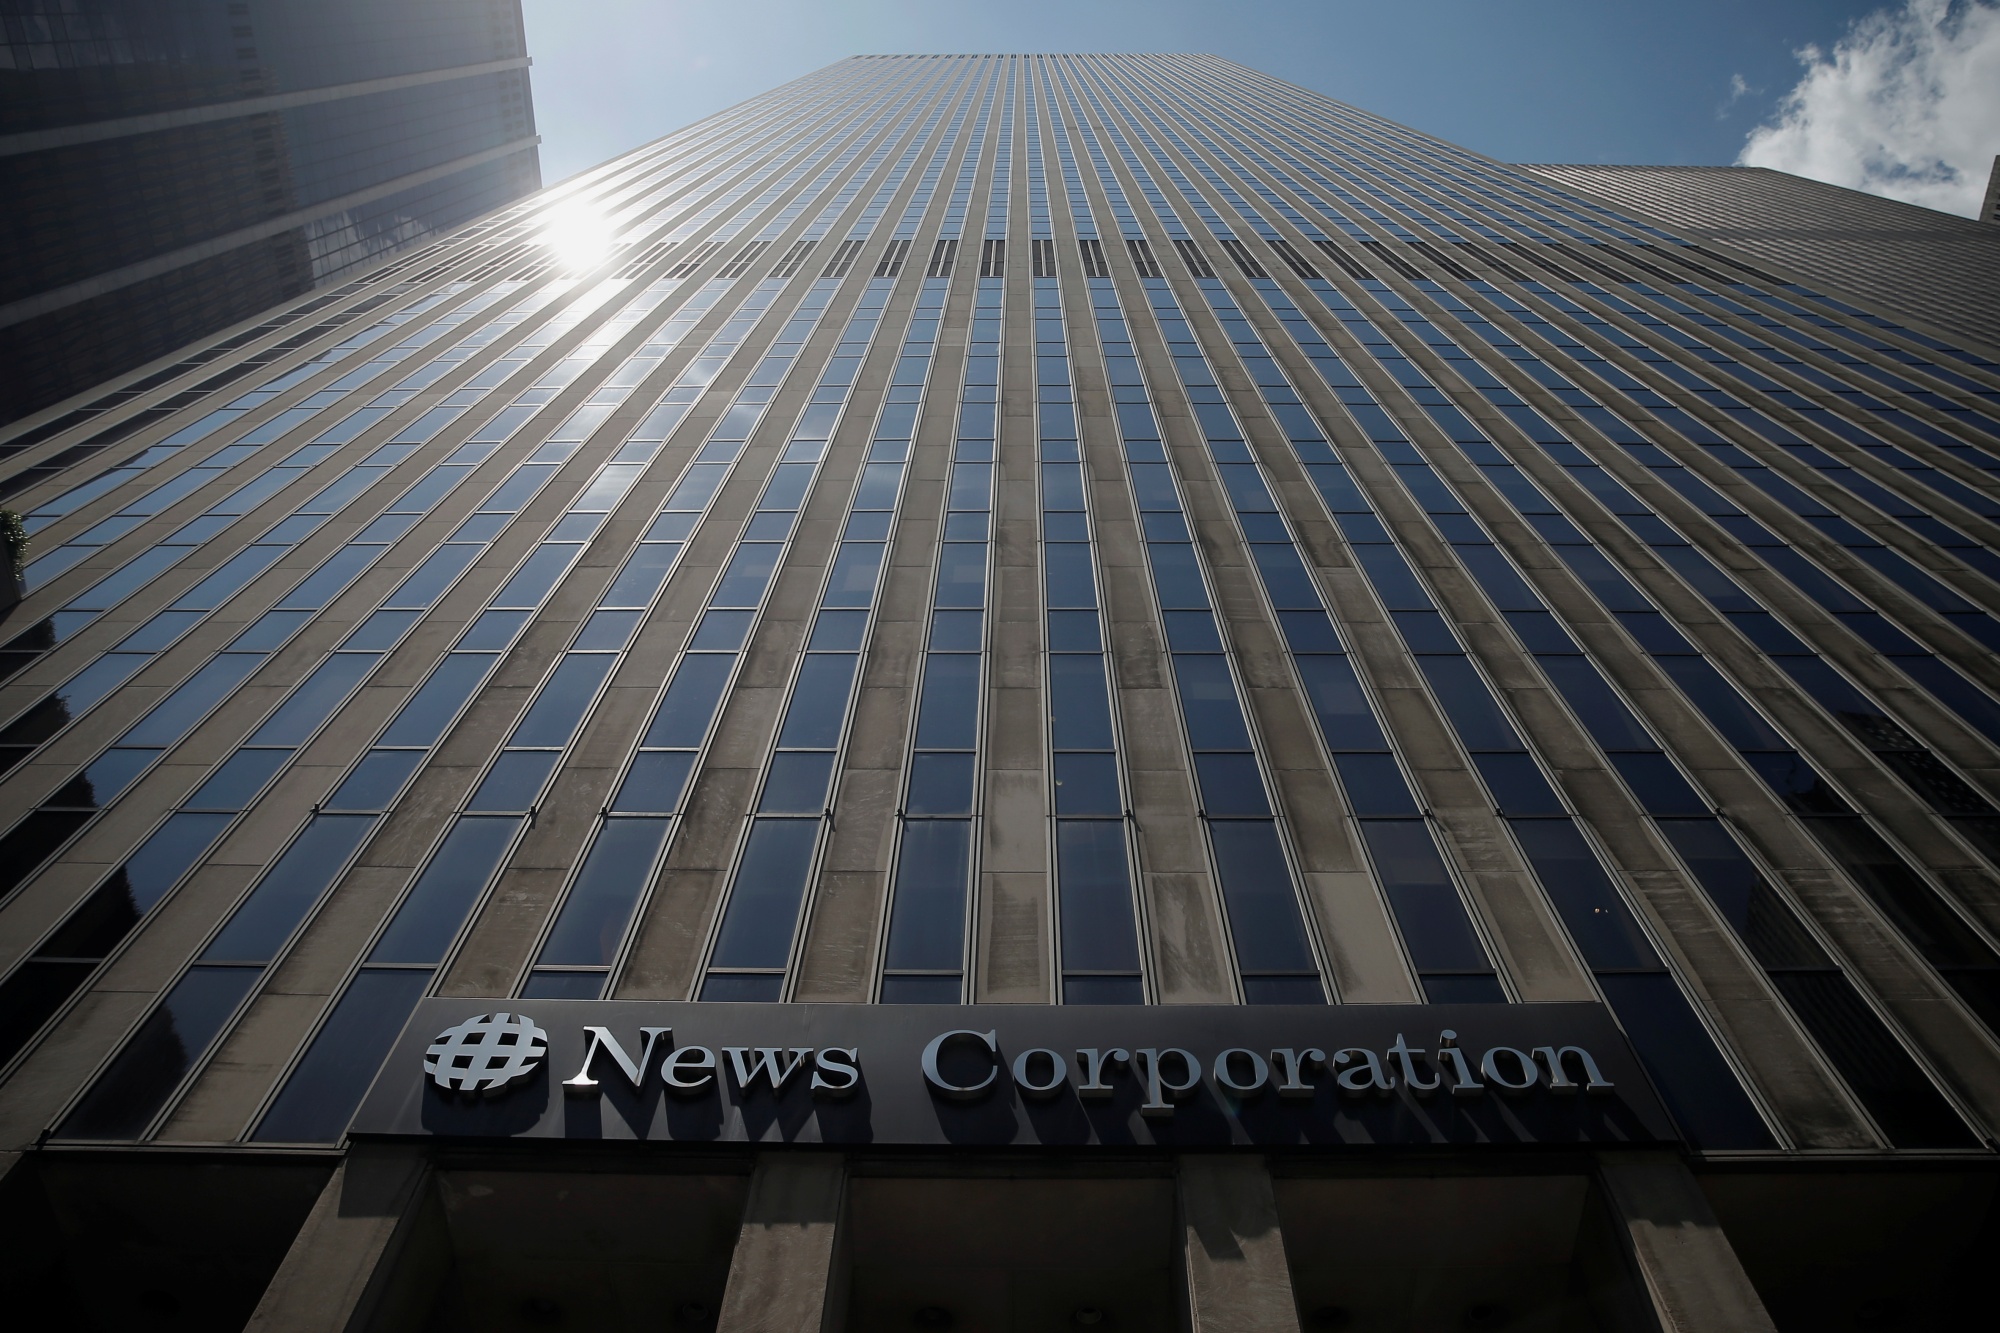 The News Corp. headquarters, home to Fox News, in New York City.